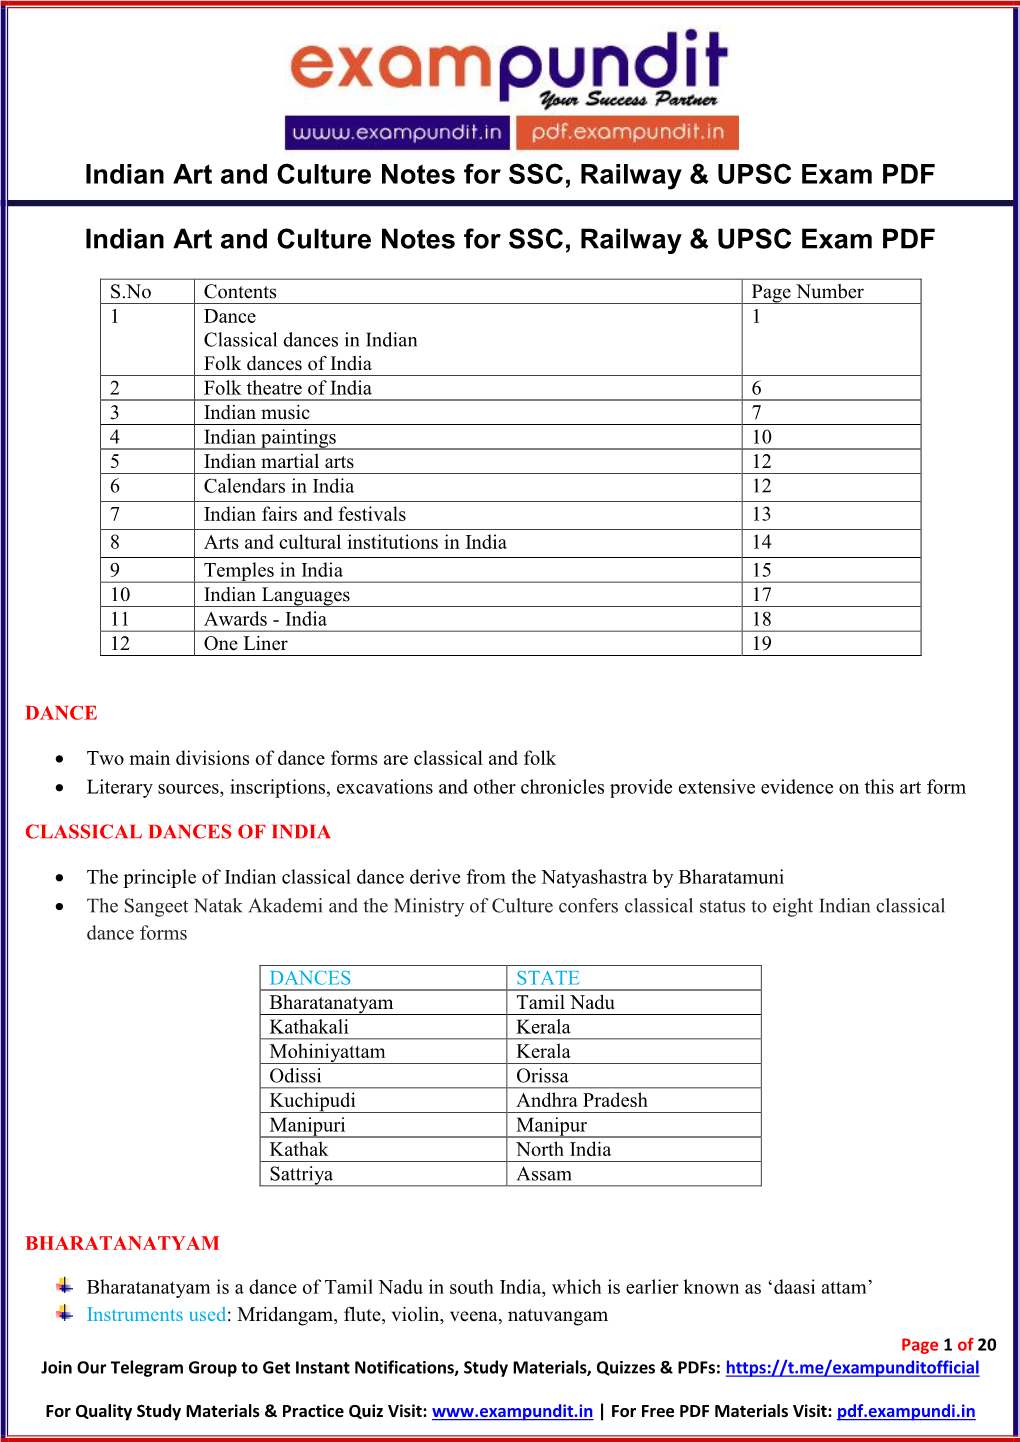 Indian Art and Culture Notes for SSC, Railway & UPSC